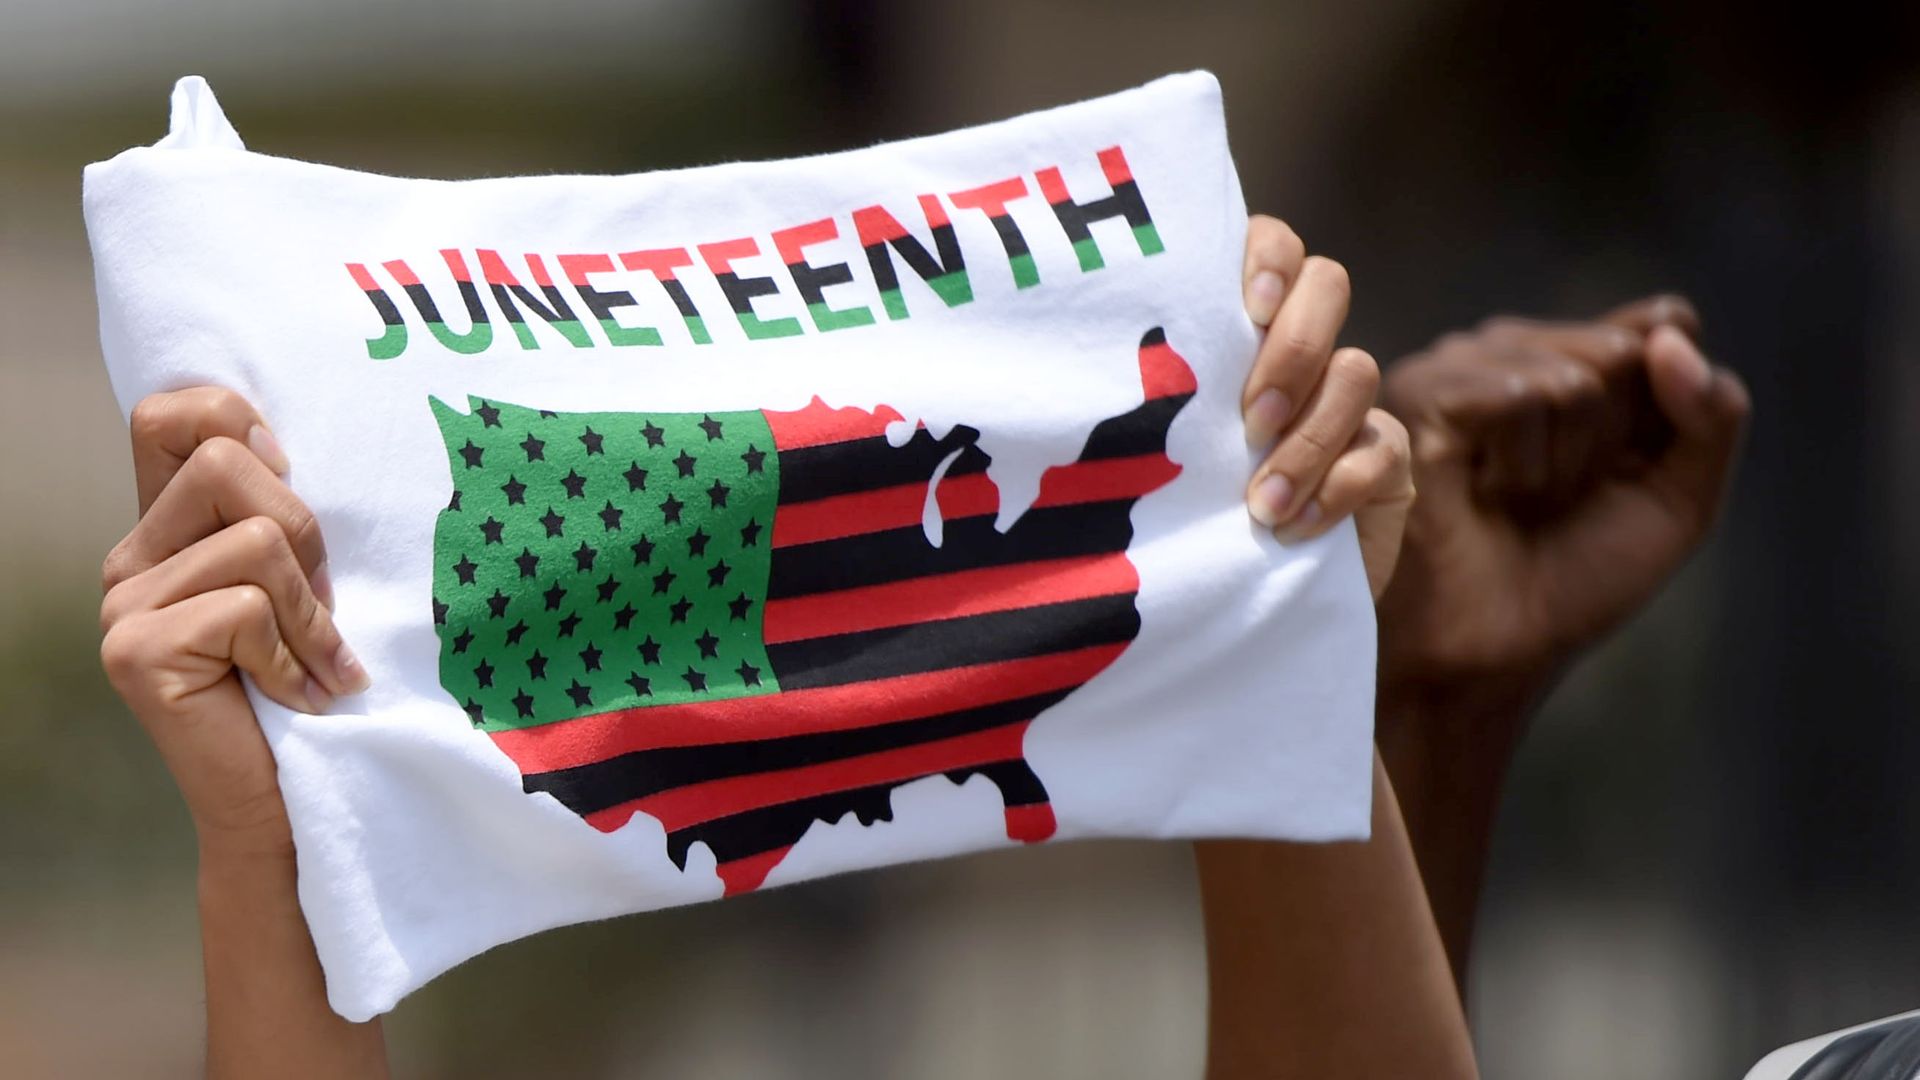 A woman holds up a sign that says Juneteenth with a map of the U.S.